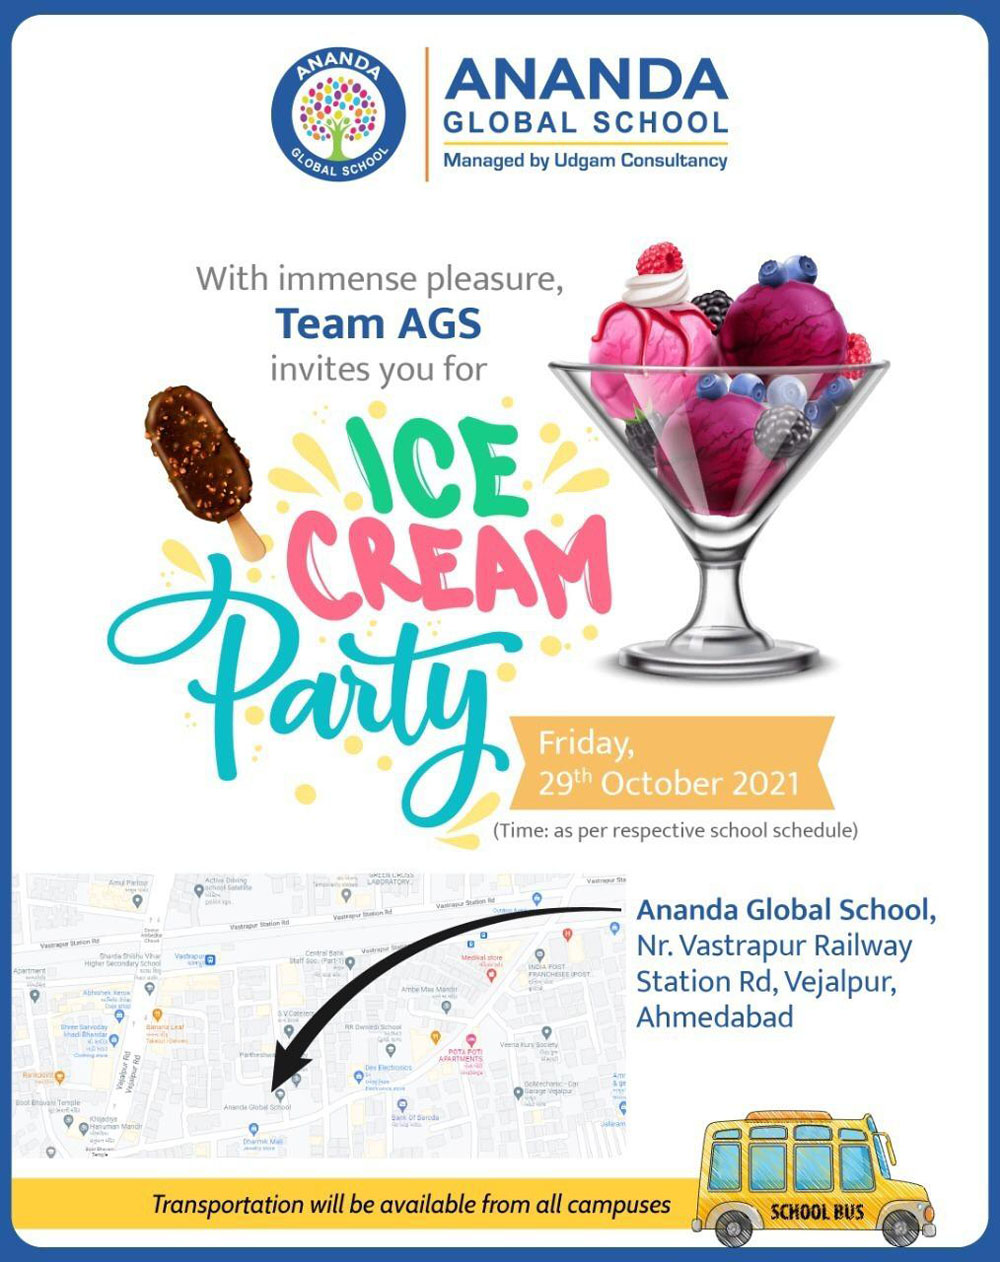 Ice-cream Party at Ananda Global School